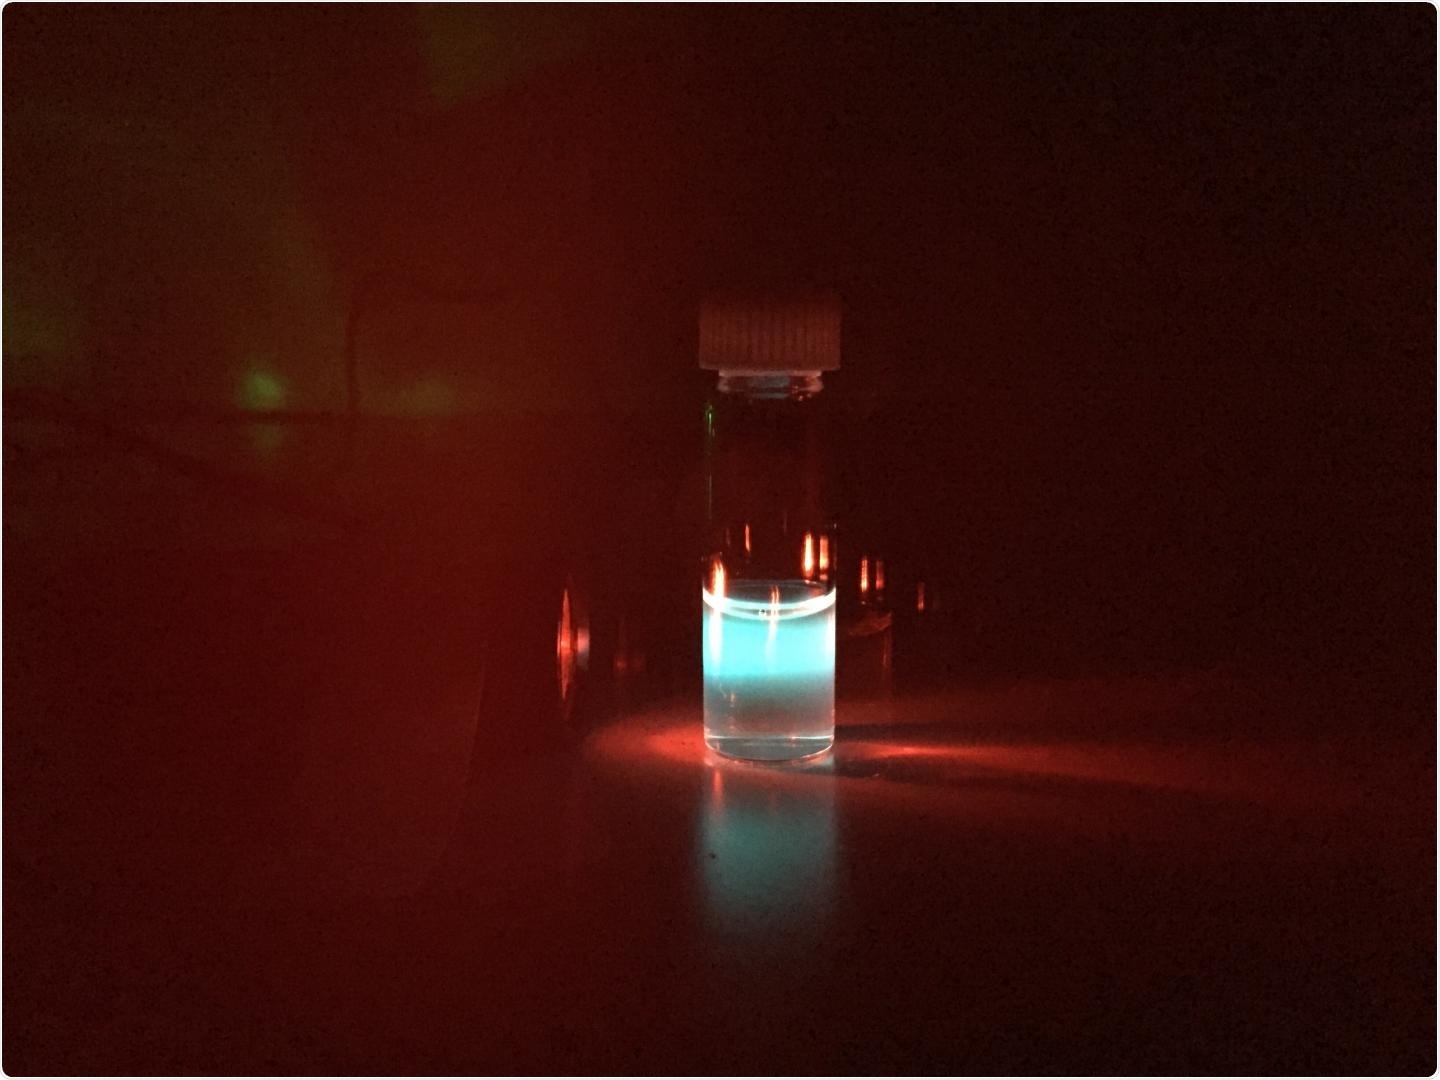 Organic nanoparticles in a vial